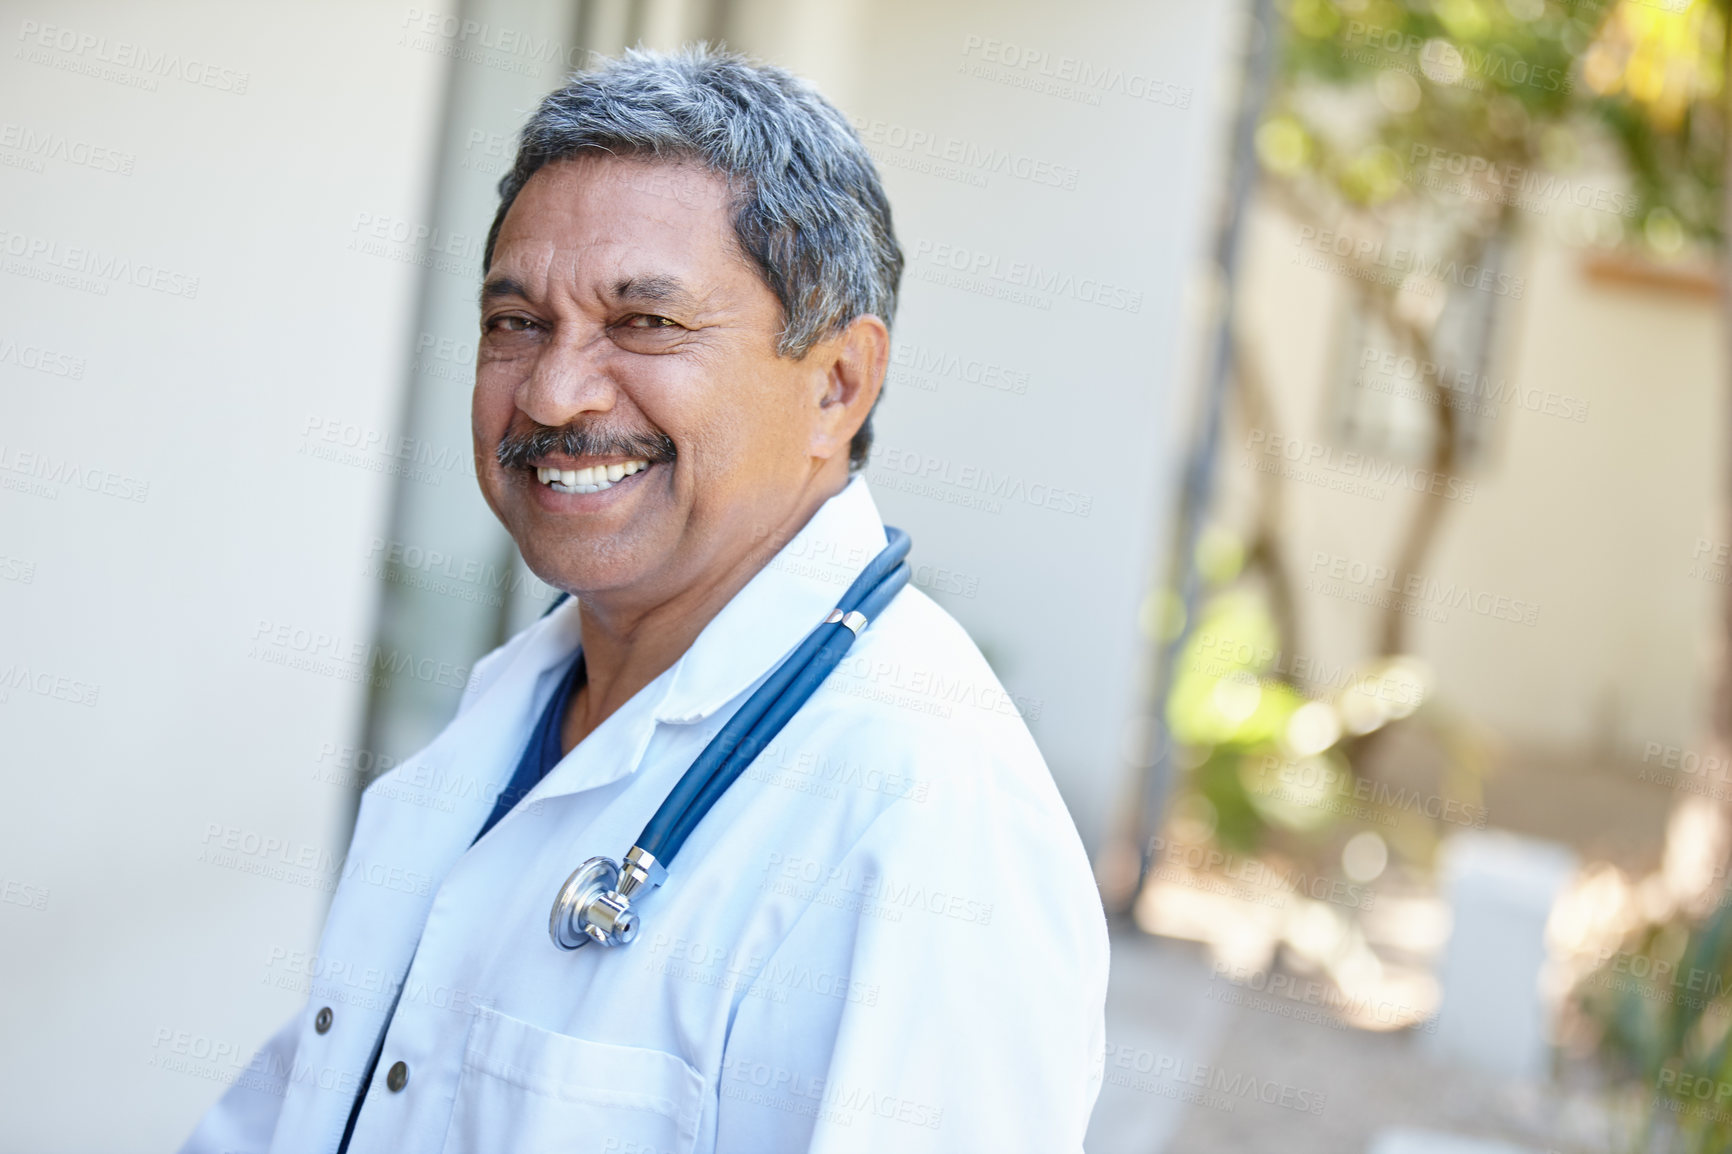 Buy stock photo Cropped portrait of a male doctor smiling happily outside